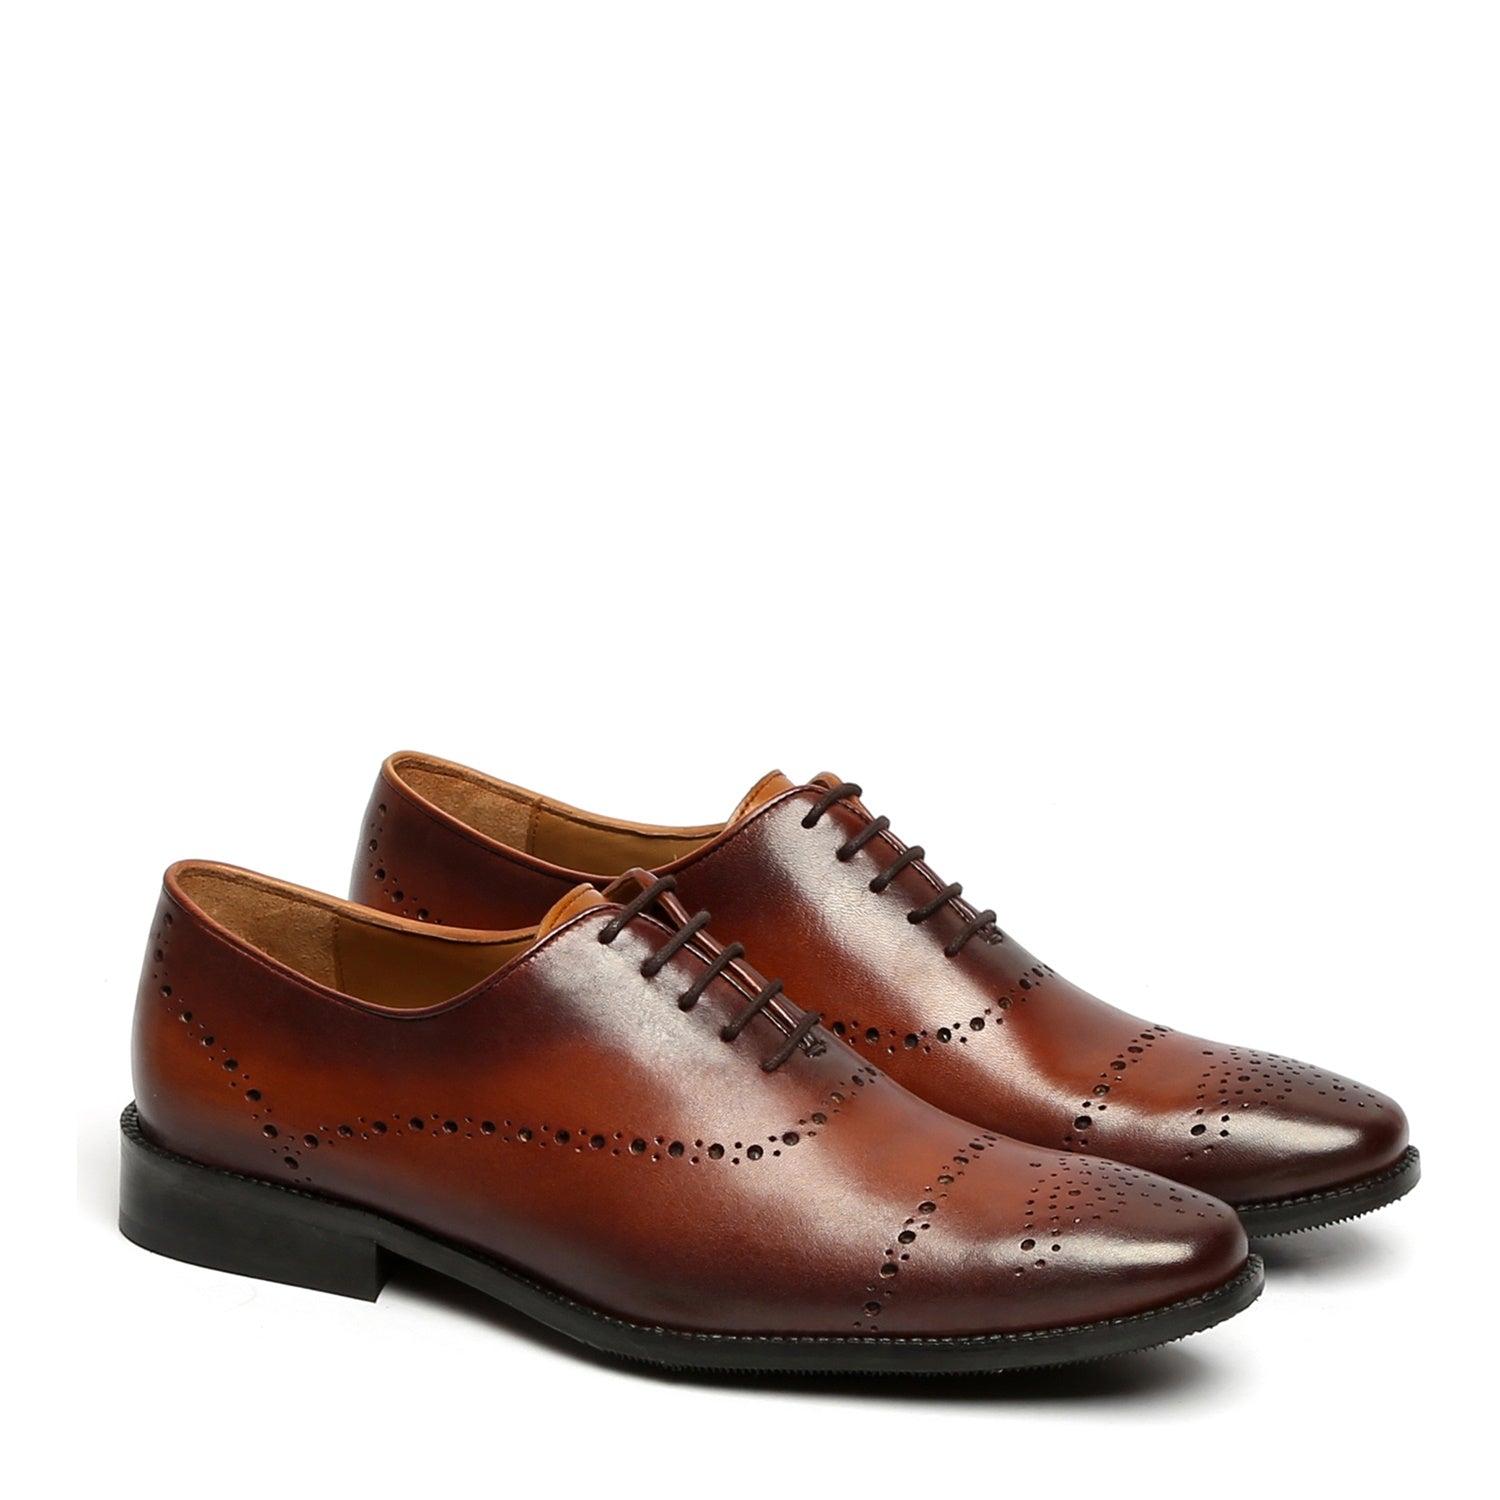 BROWN FULL BROGUE PUNCH LEATHER OXFORD SHOES BY BRUNE & BARESKIN